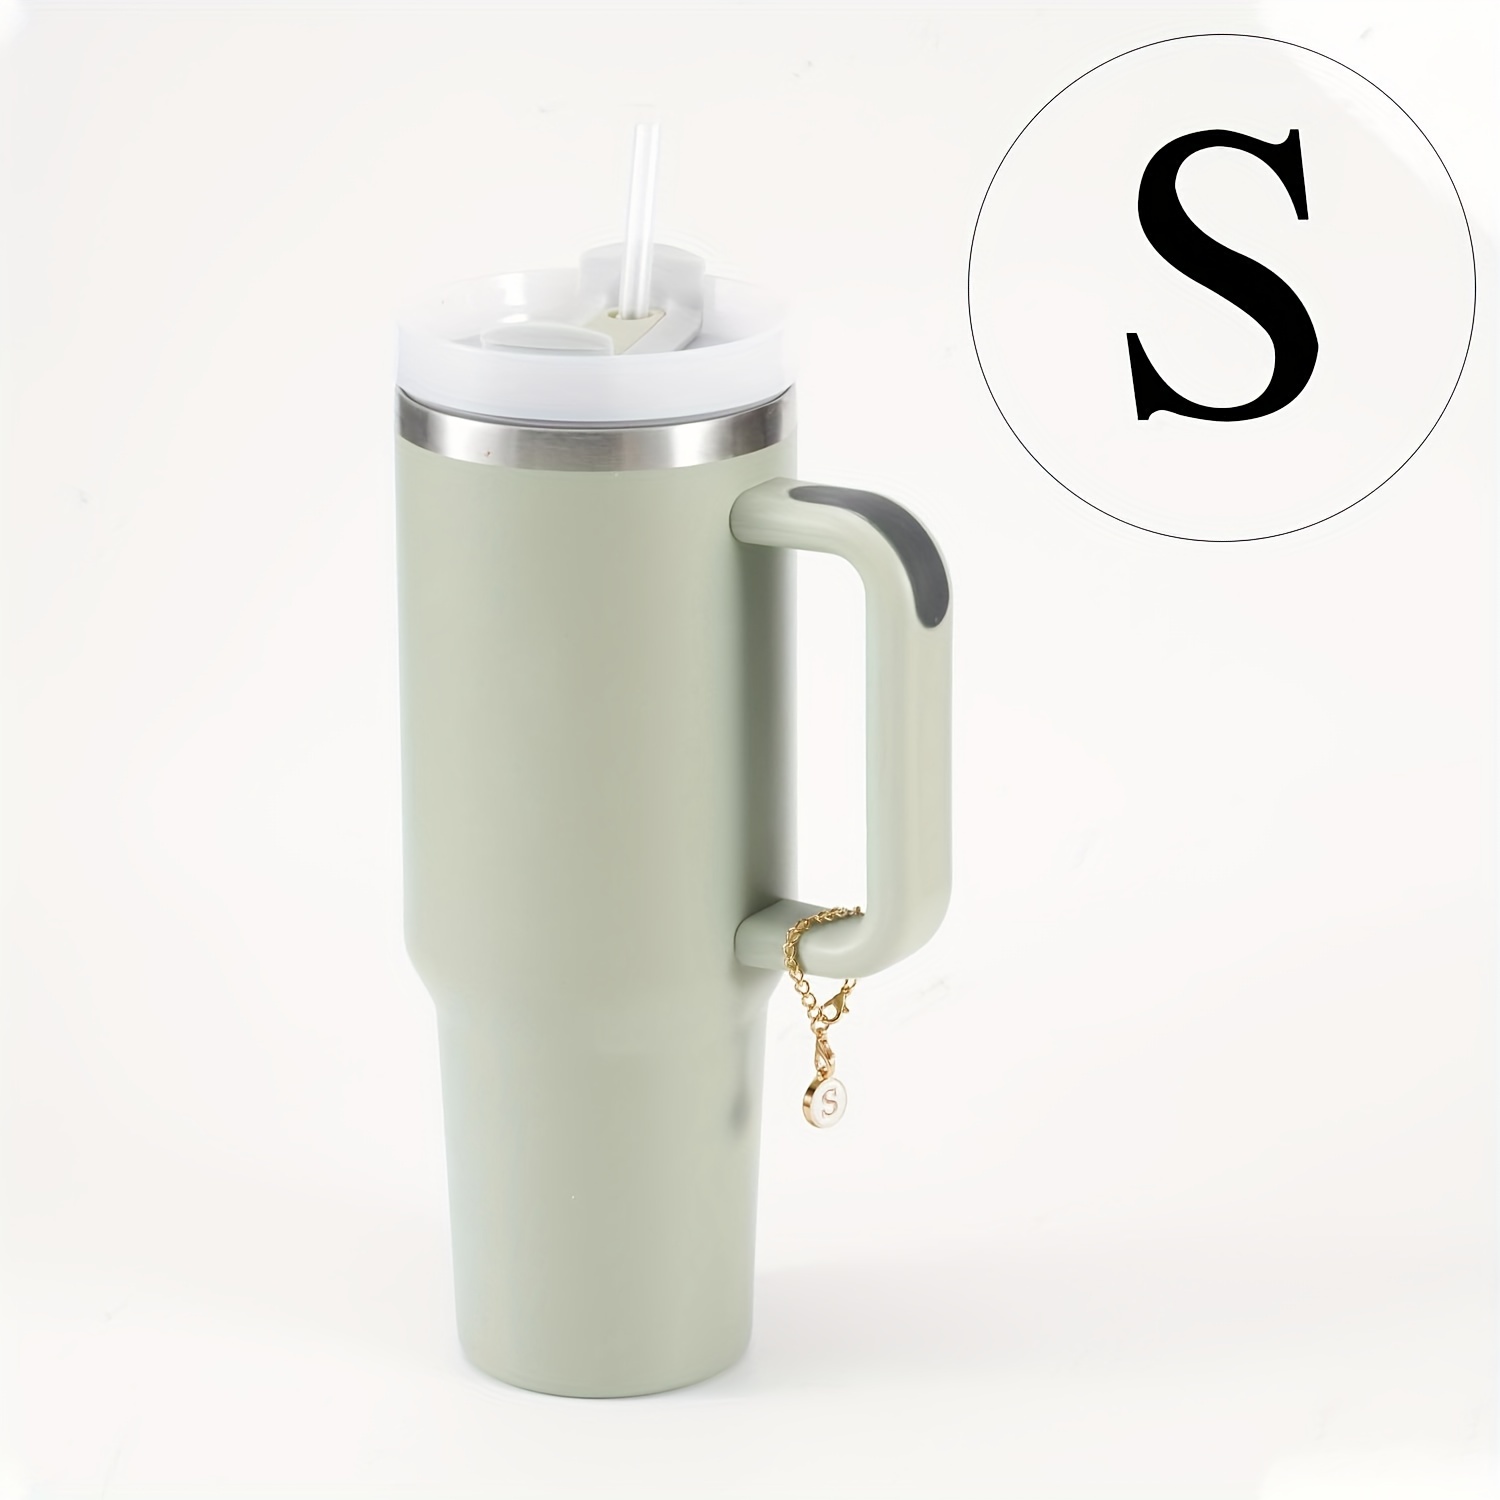 Stanley Tumbler Cup Charm Accessories for Water Bottle Stanley